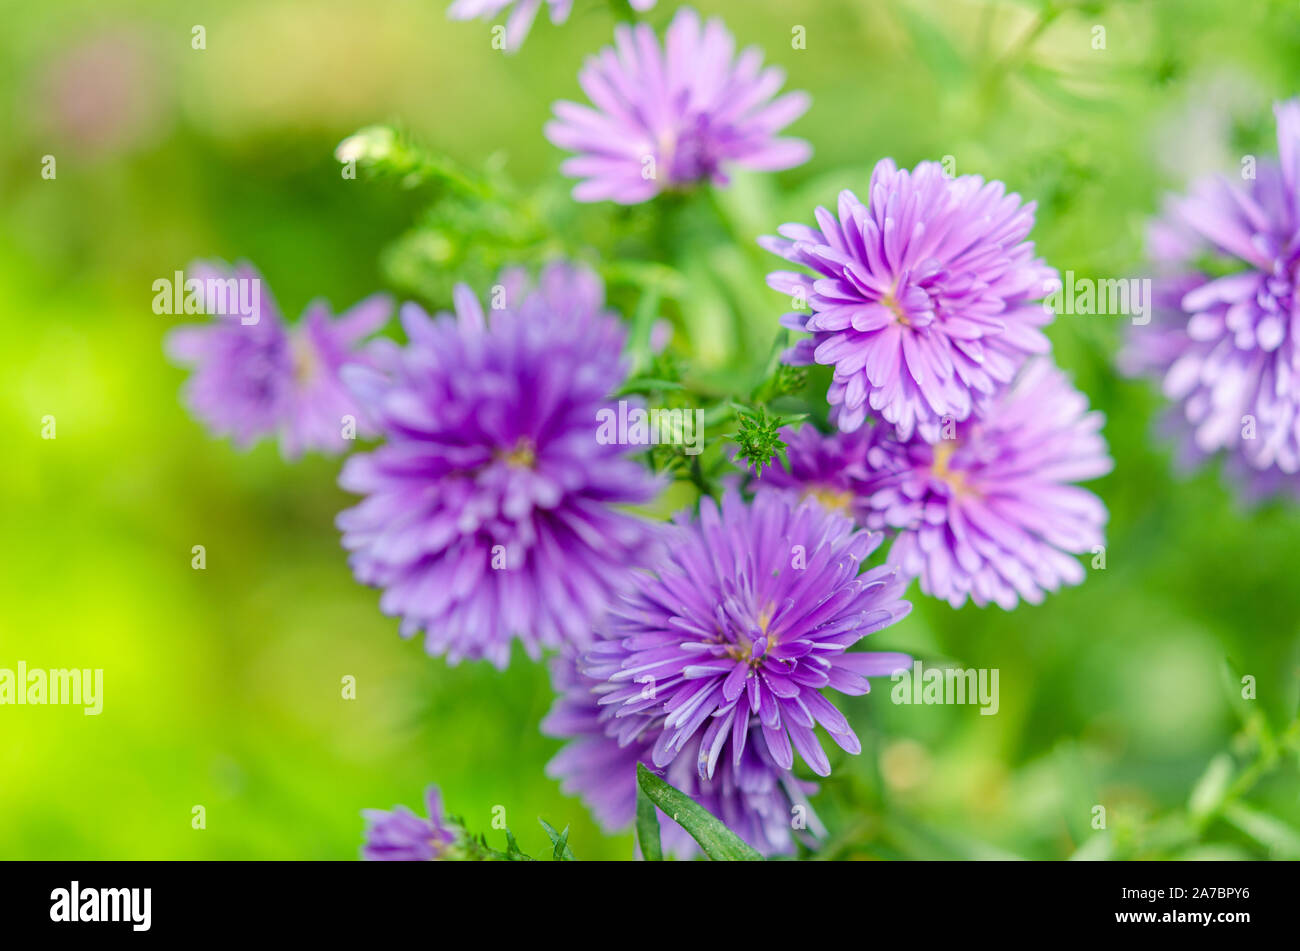 Purple chrysanthemum beautiful flower in the garden on a green background Stock Photo